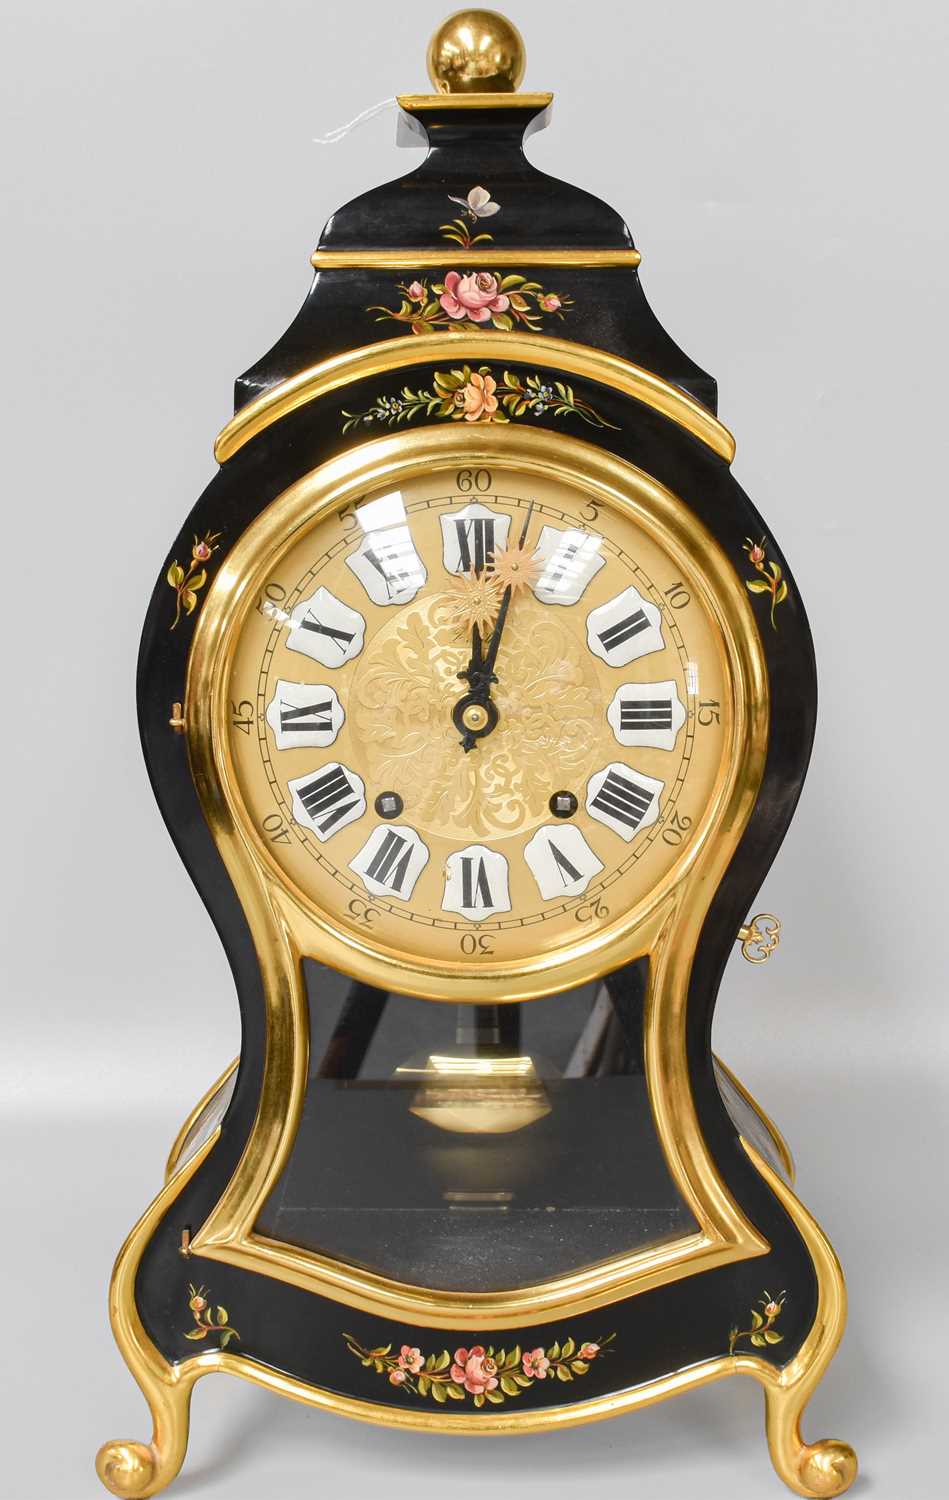 A Zenith Lacquered Bracket Clock, case with floral decoration, 45cm high, with matching lacquered